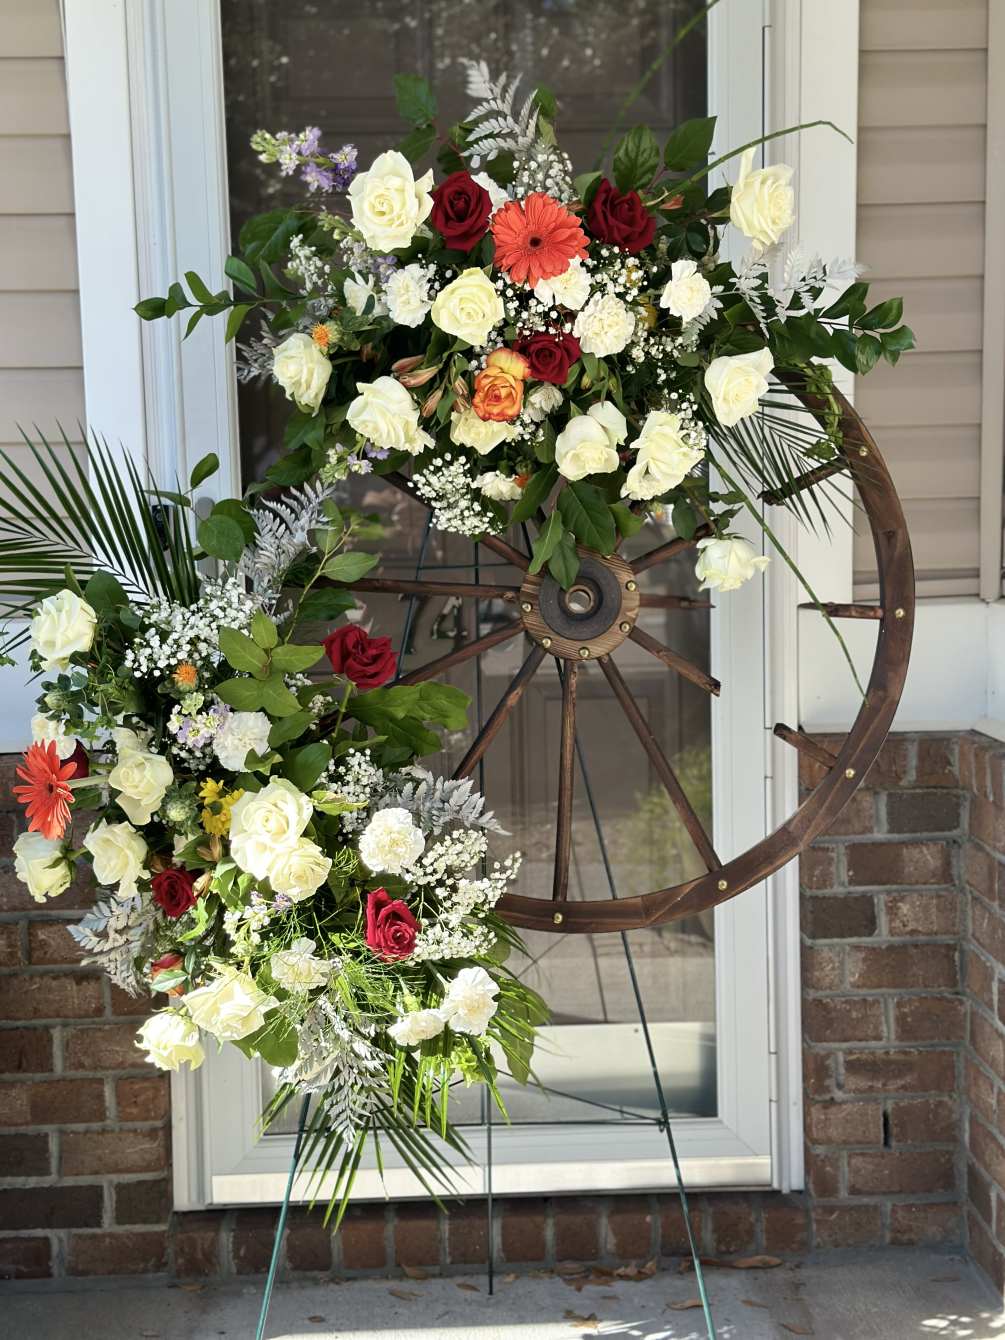 Using a wooden wheel as a base for a floral arrangement for